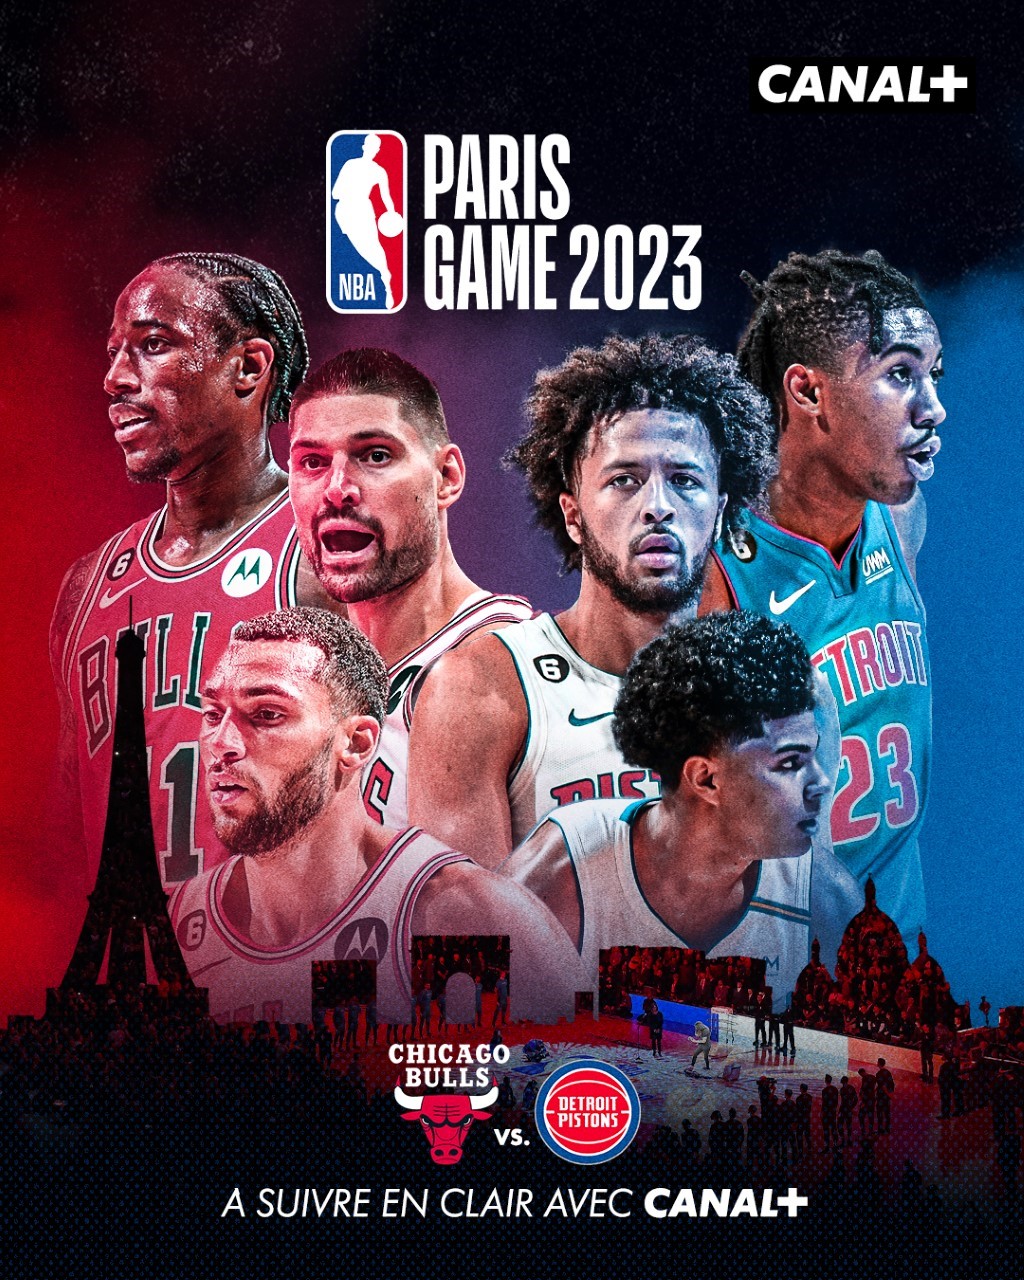 Chicago Bulls to Play Detroit Pistons in 2023 NBA Paris Game – NBC Chicago